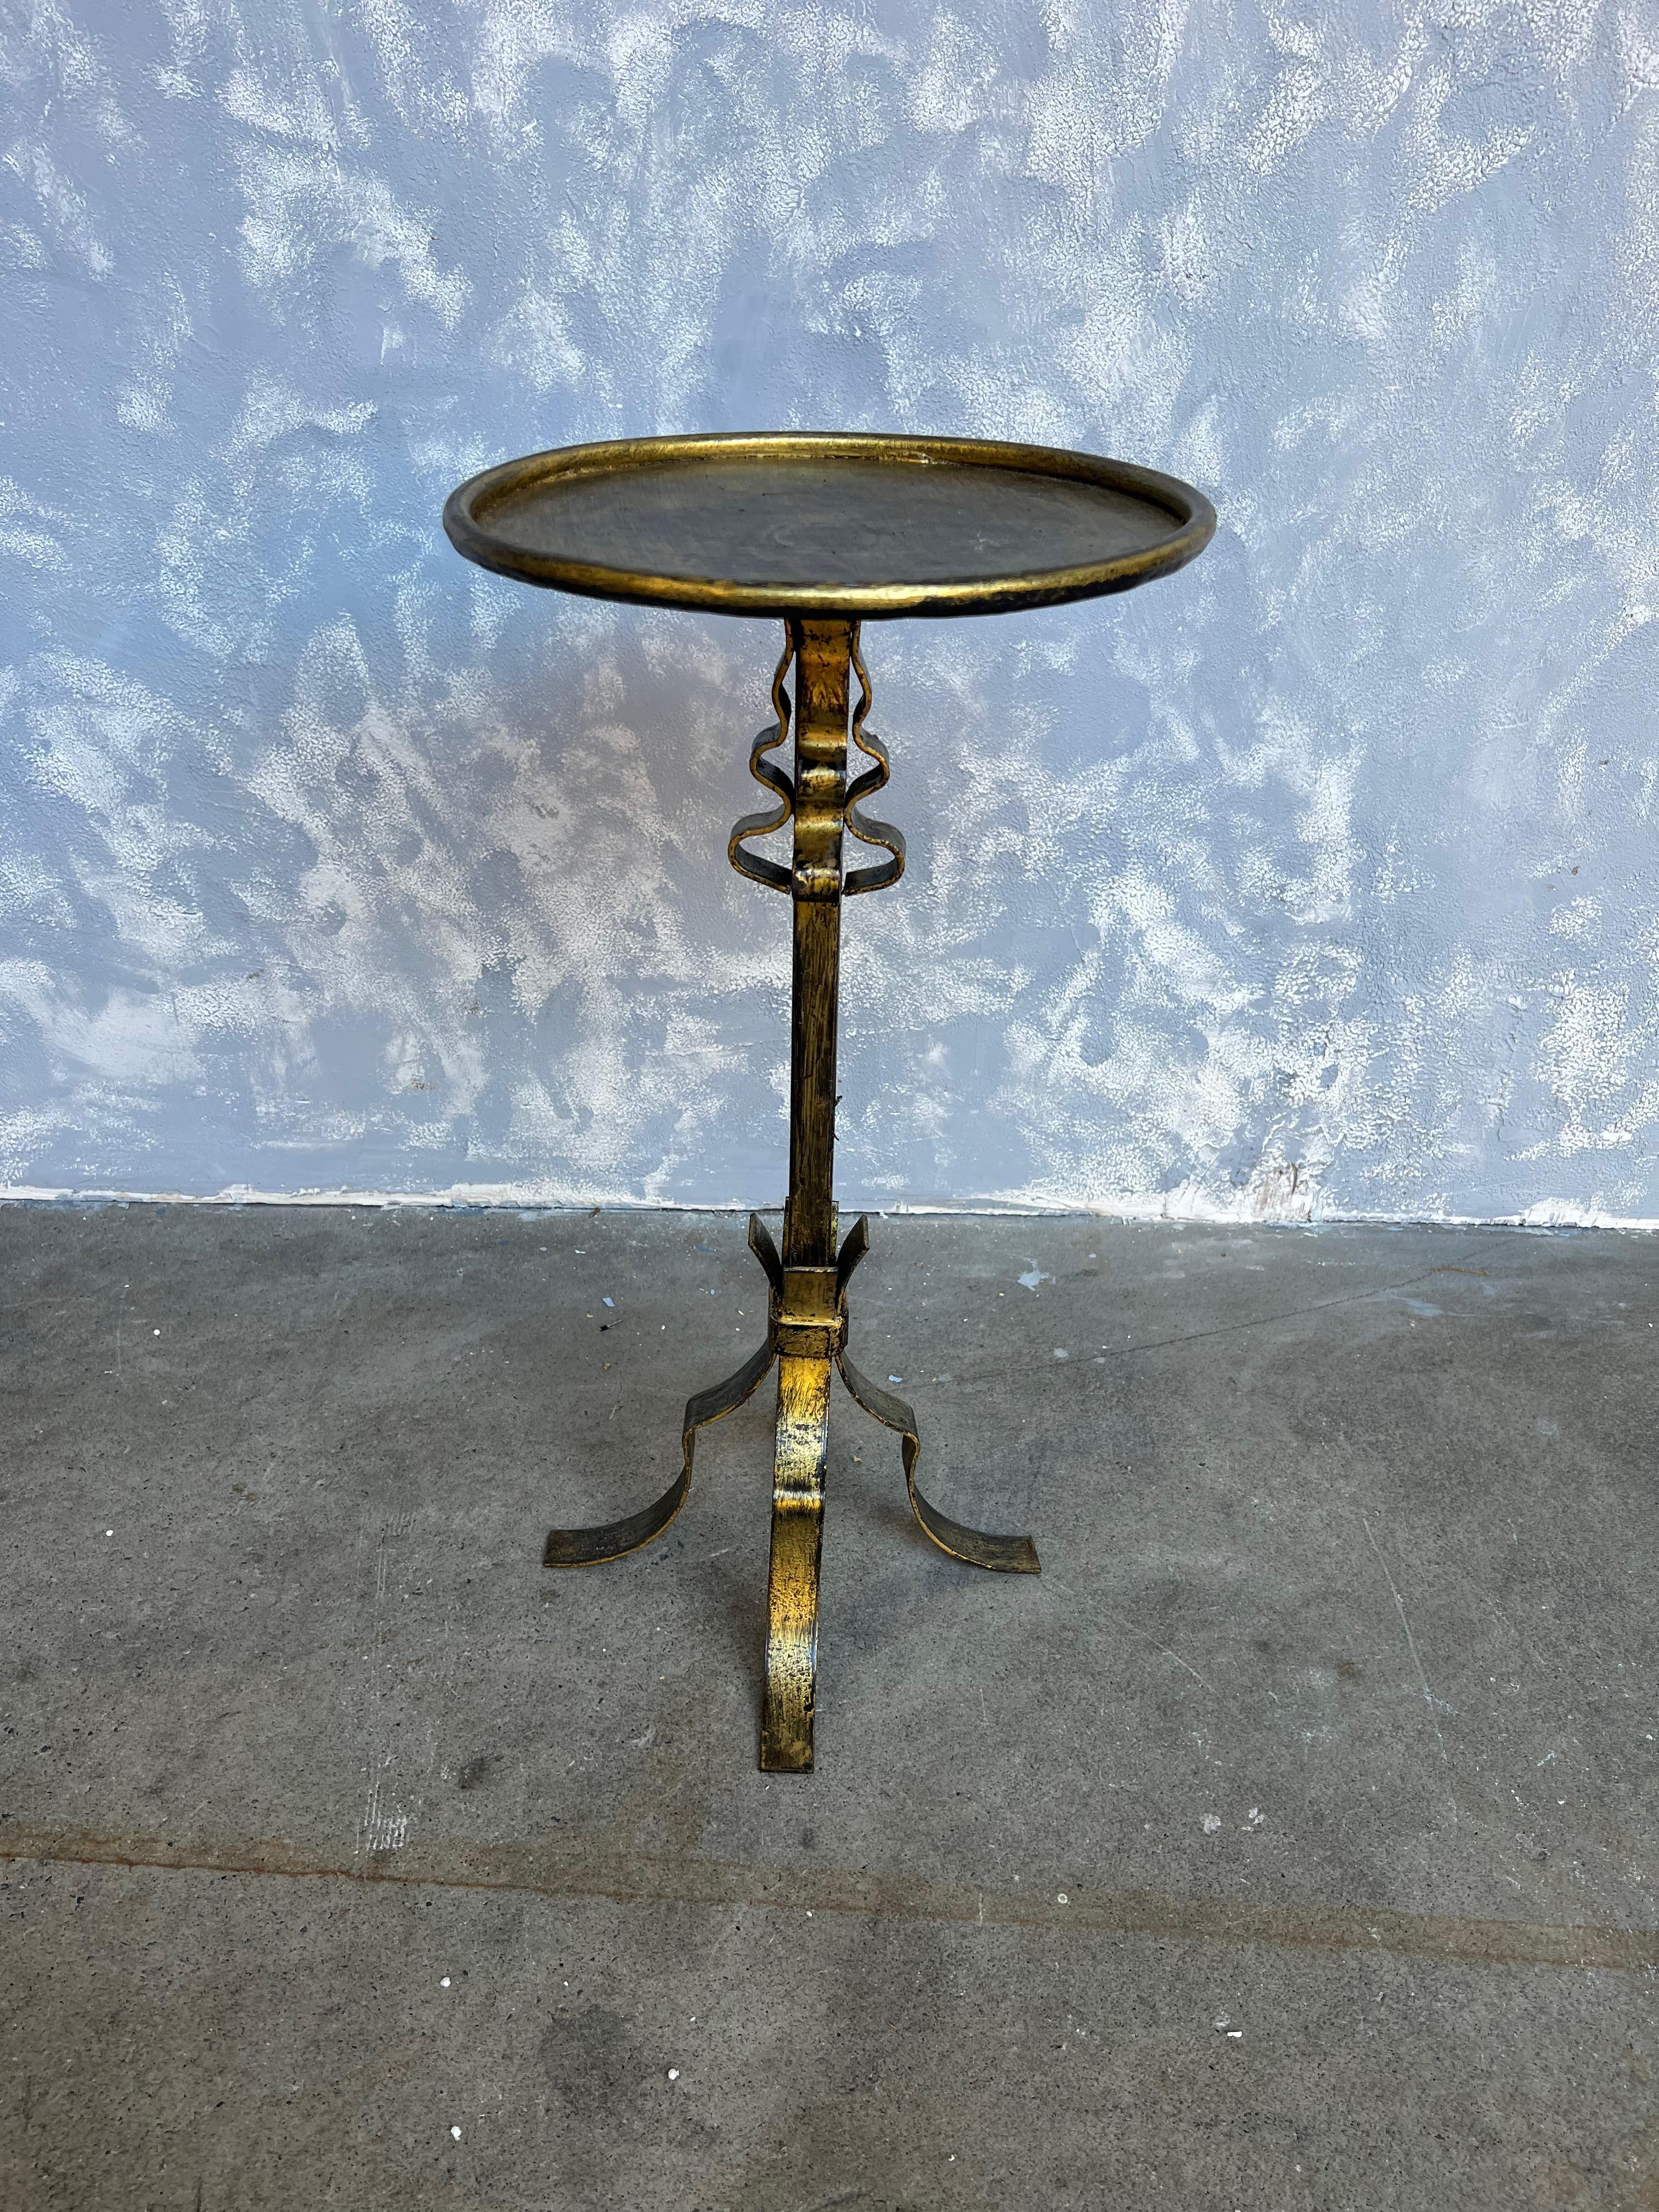 This interesting and ornate small gilt iron side table is perfect for holding a drink or a cup of coffee. Its hand-patinated gilt finish features just the right amount of gold over a darker black undercoat, adding texture and dimension to showcase